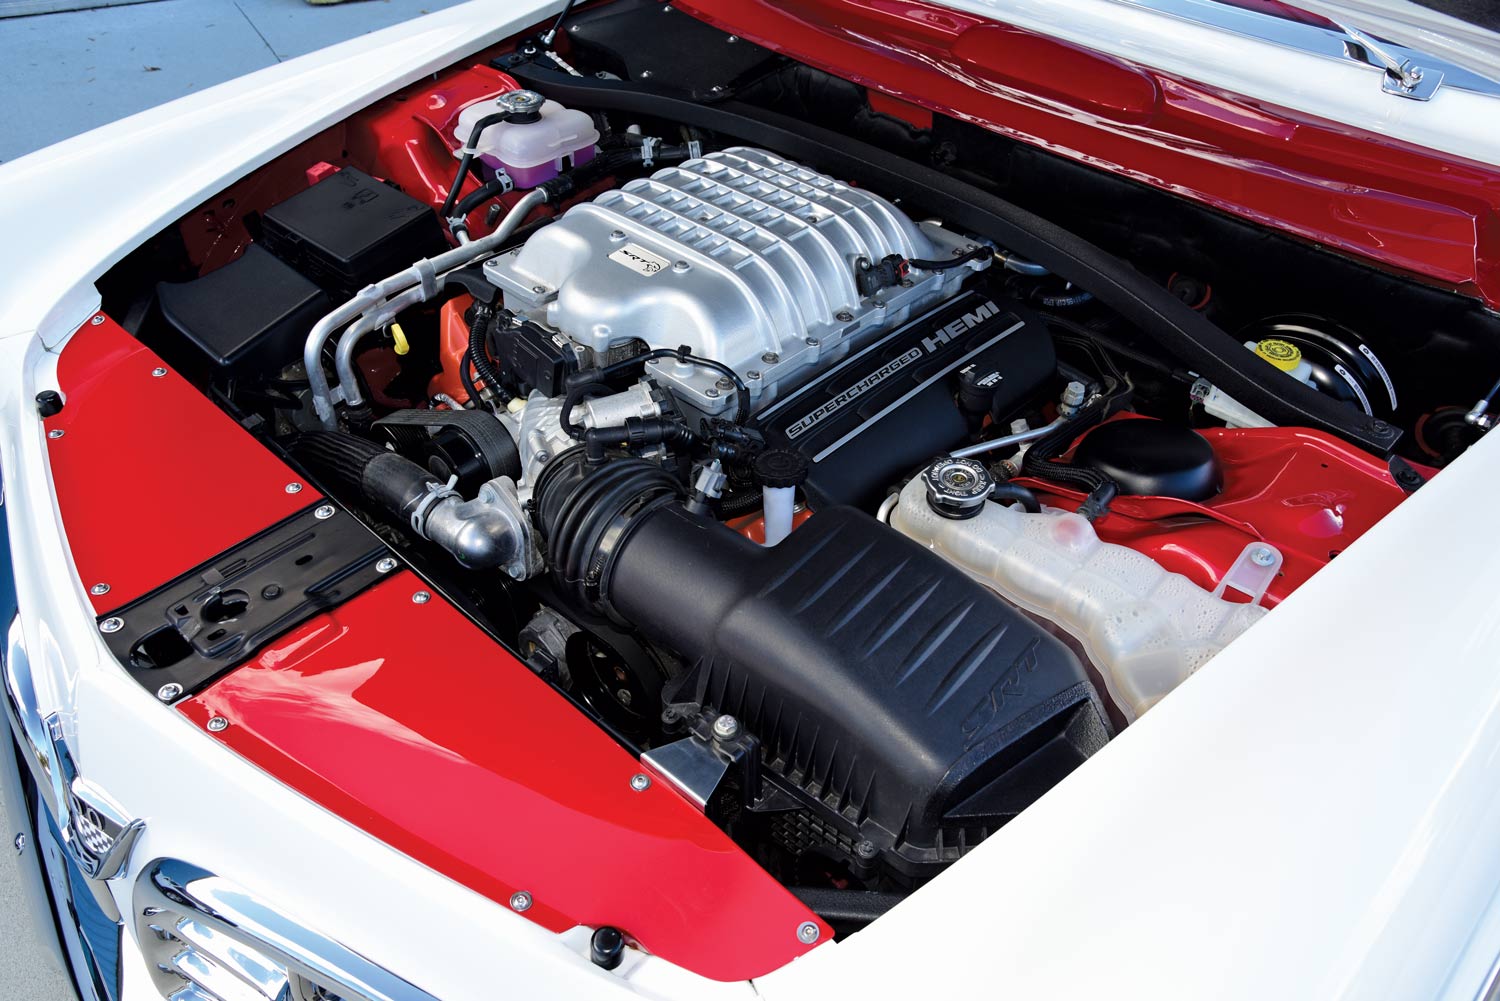 Hellcat engine in red engine bay